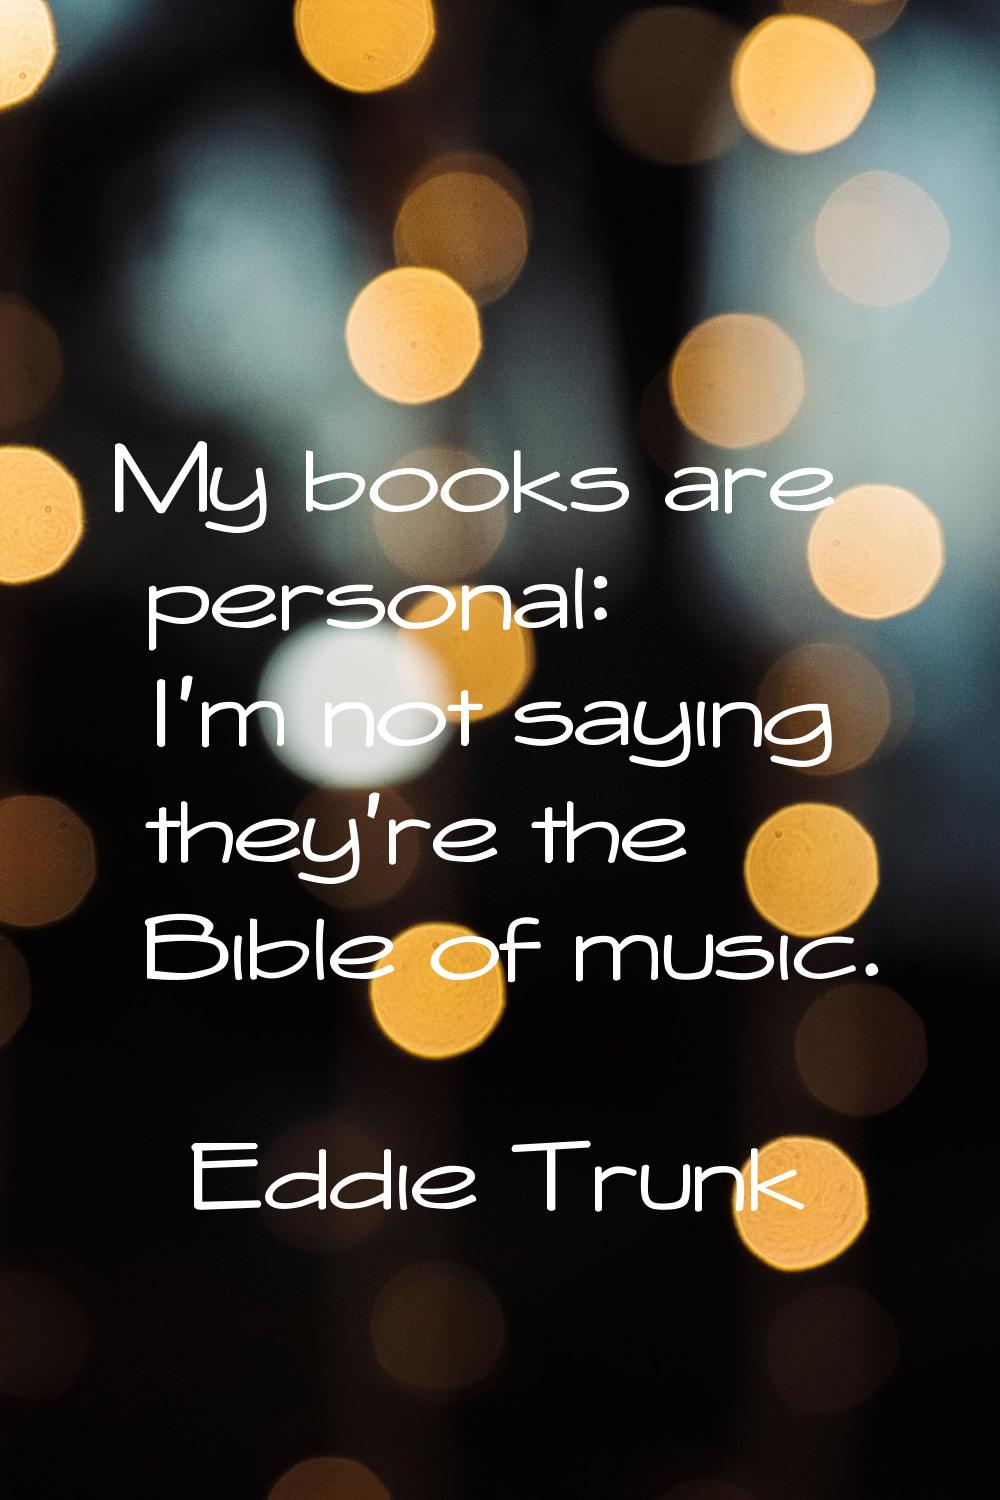 My books are personal: I'm not saying they're the Bible of music.